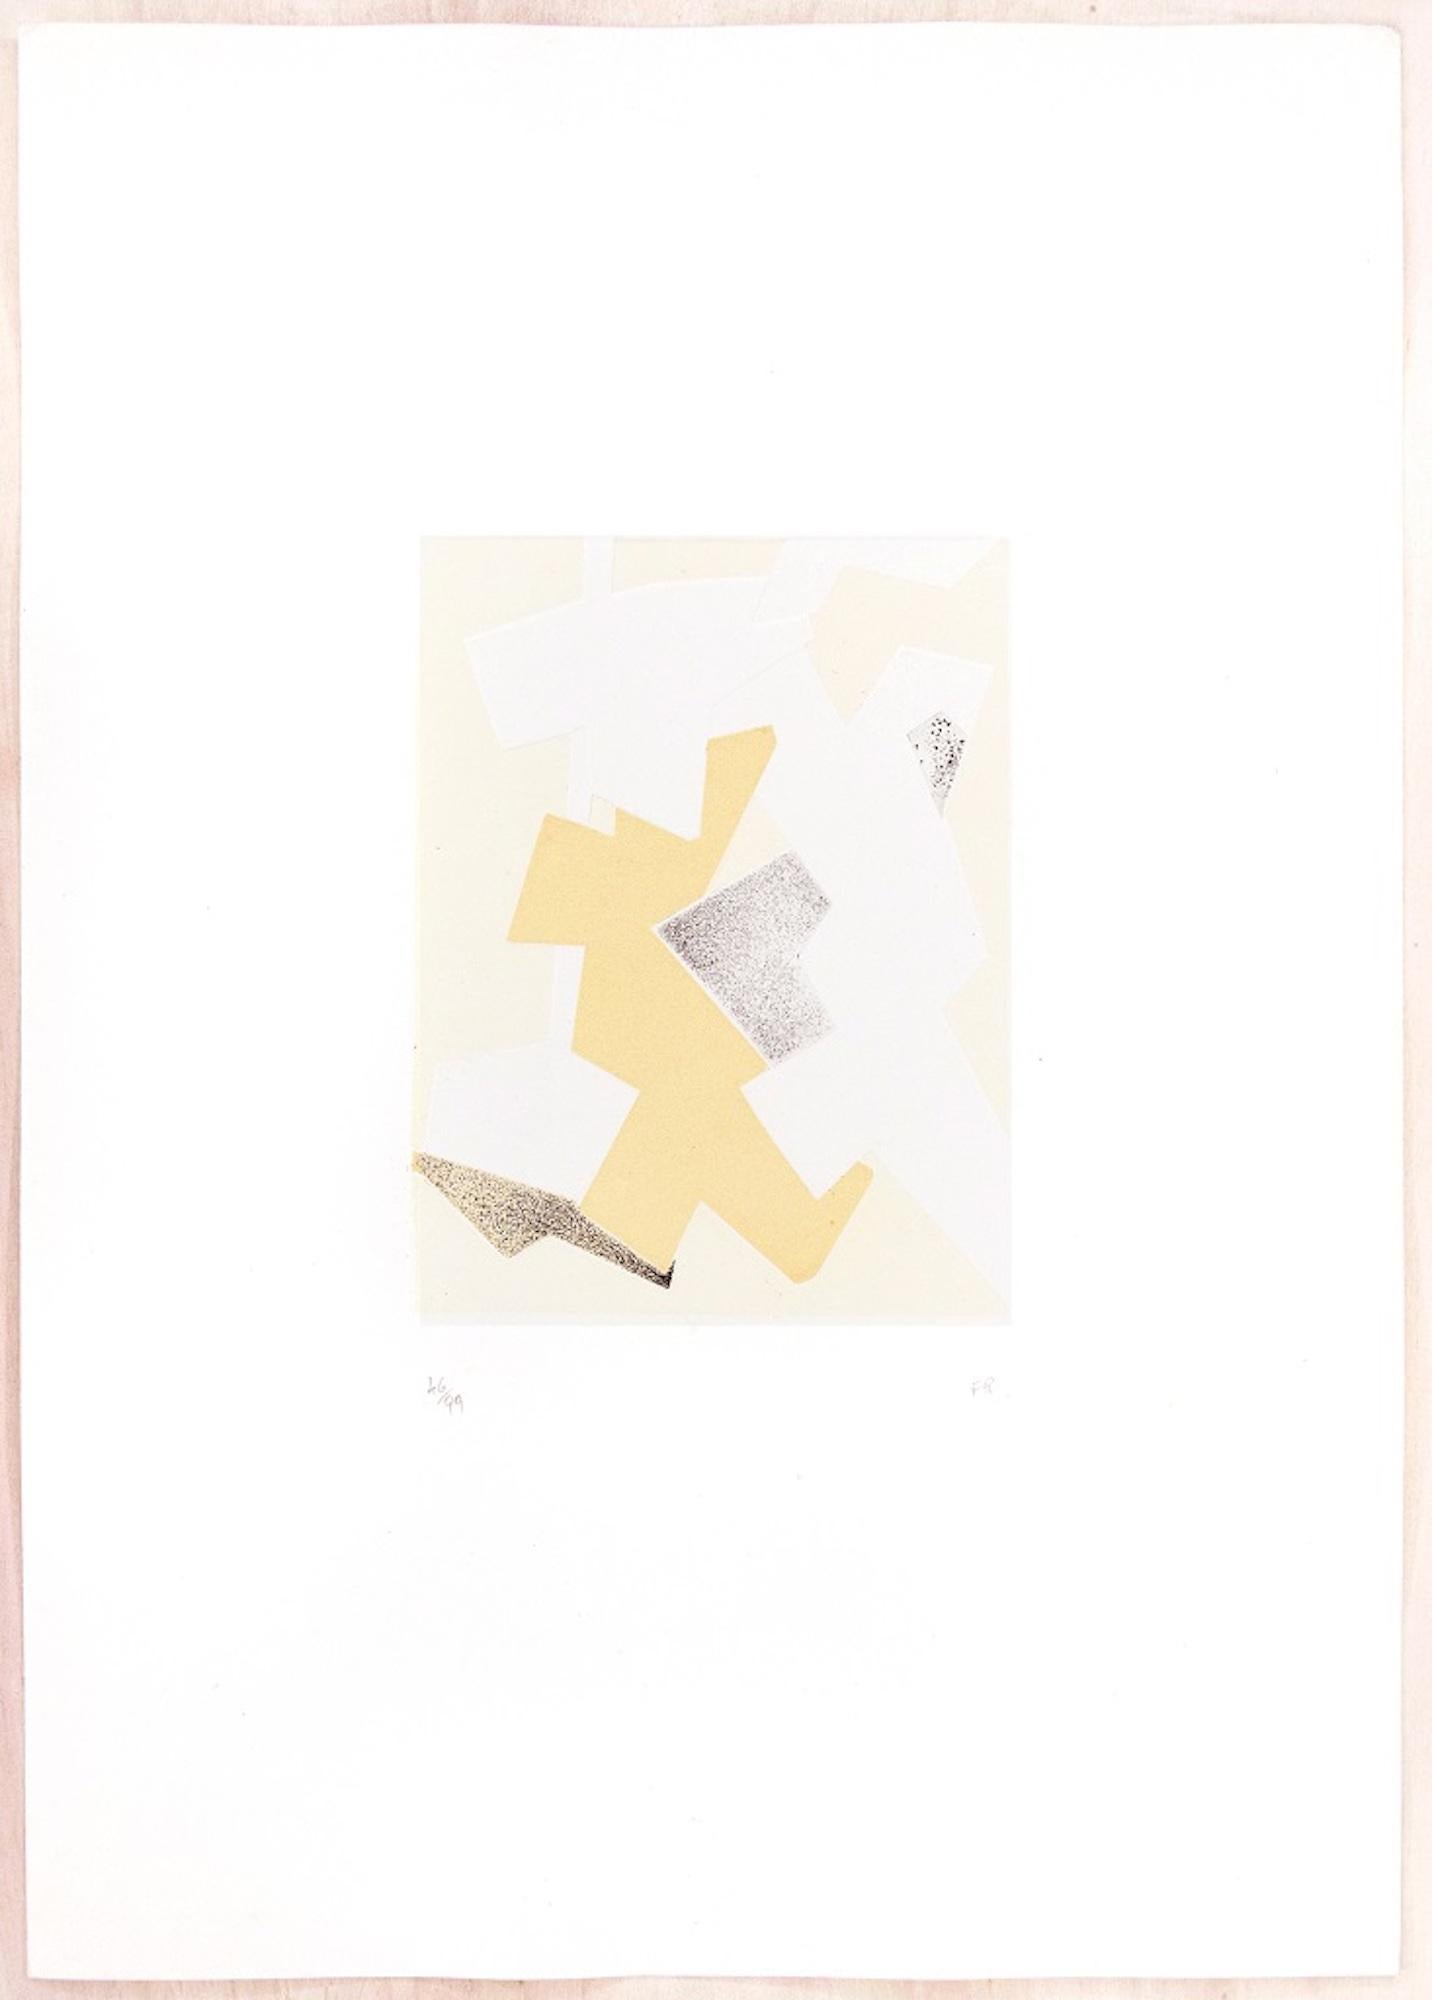 Beige composition is an etching and chalcography on paper, realized in the Seventy of XX century by the German artist, Hans Richter, published by La Nuova Foglio, a publishing house of Macerata. 

The last graphic work of the master, from a